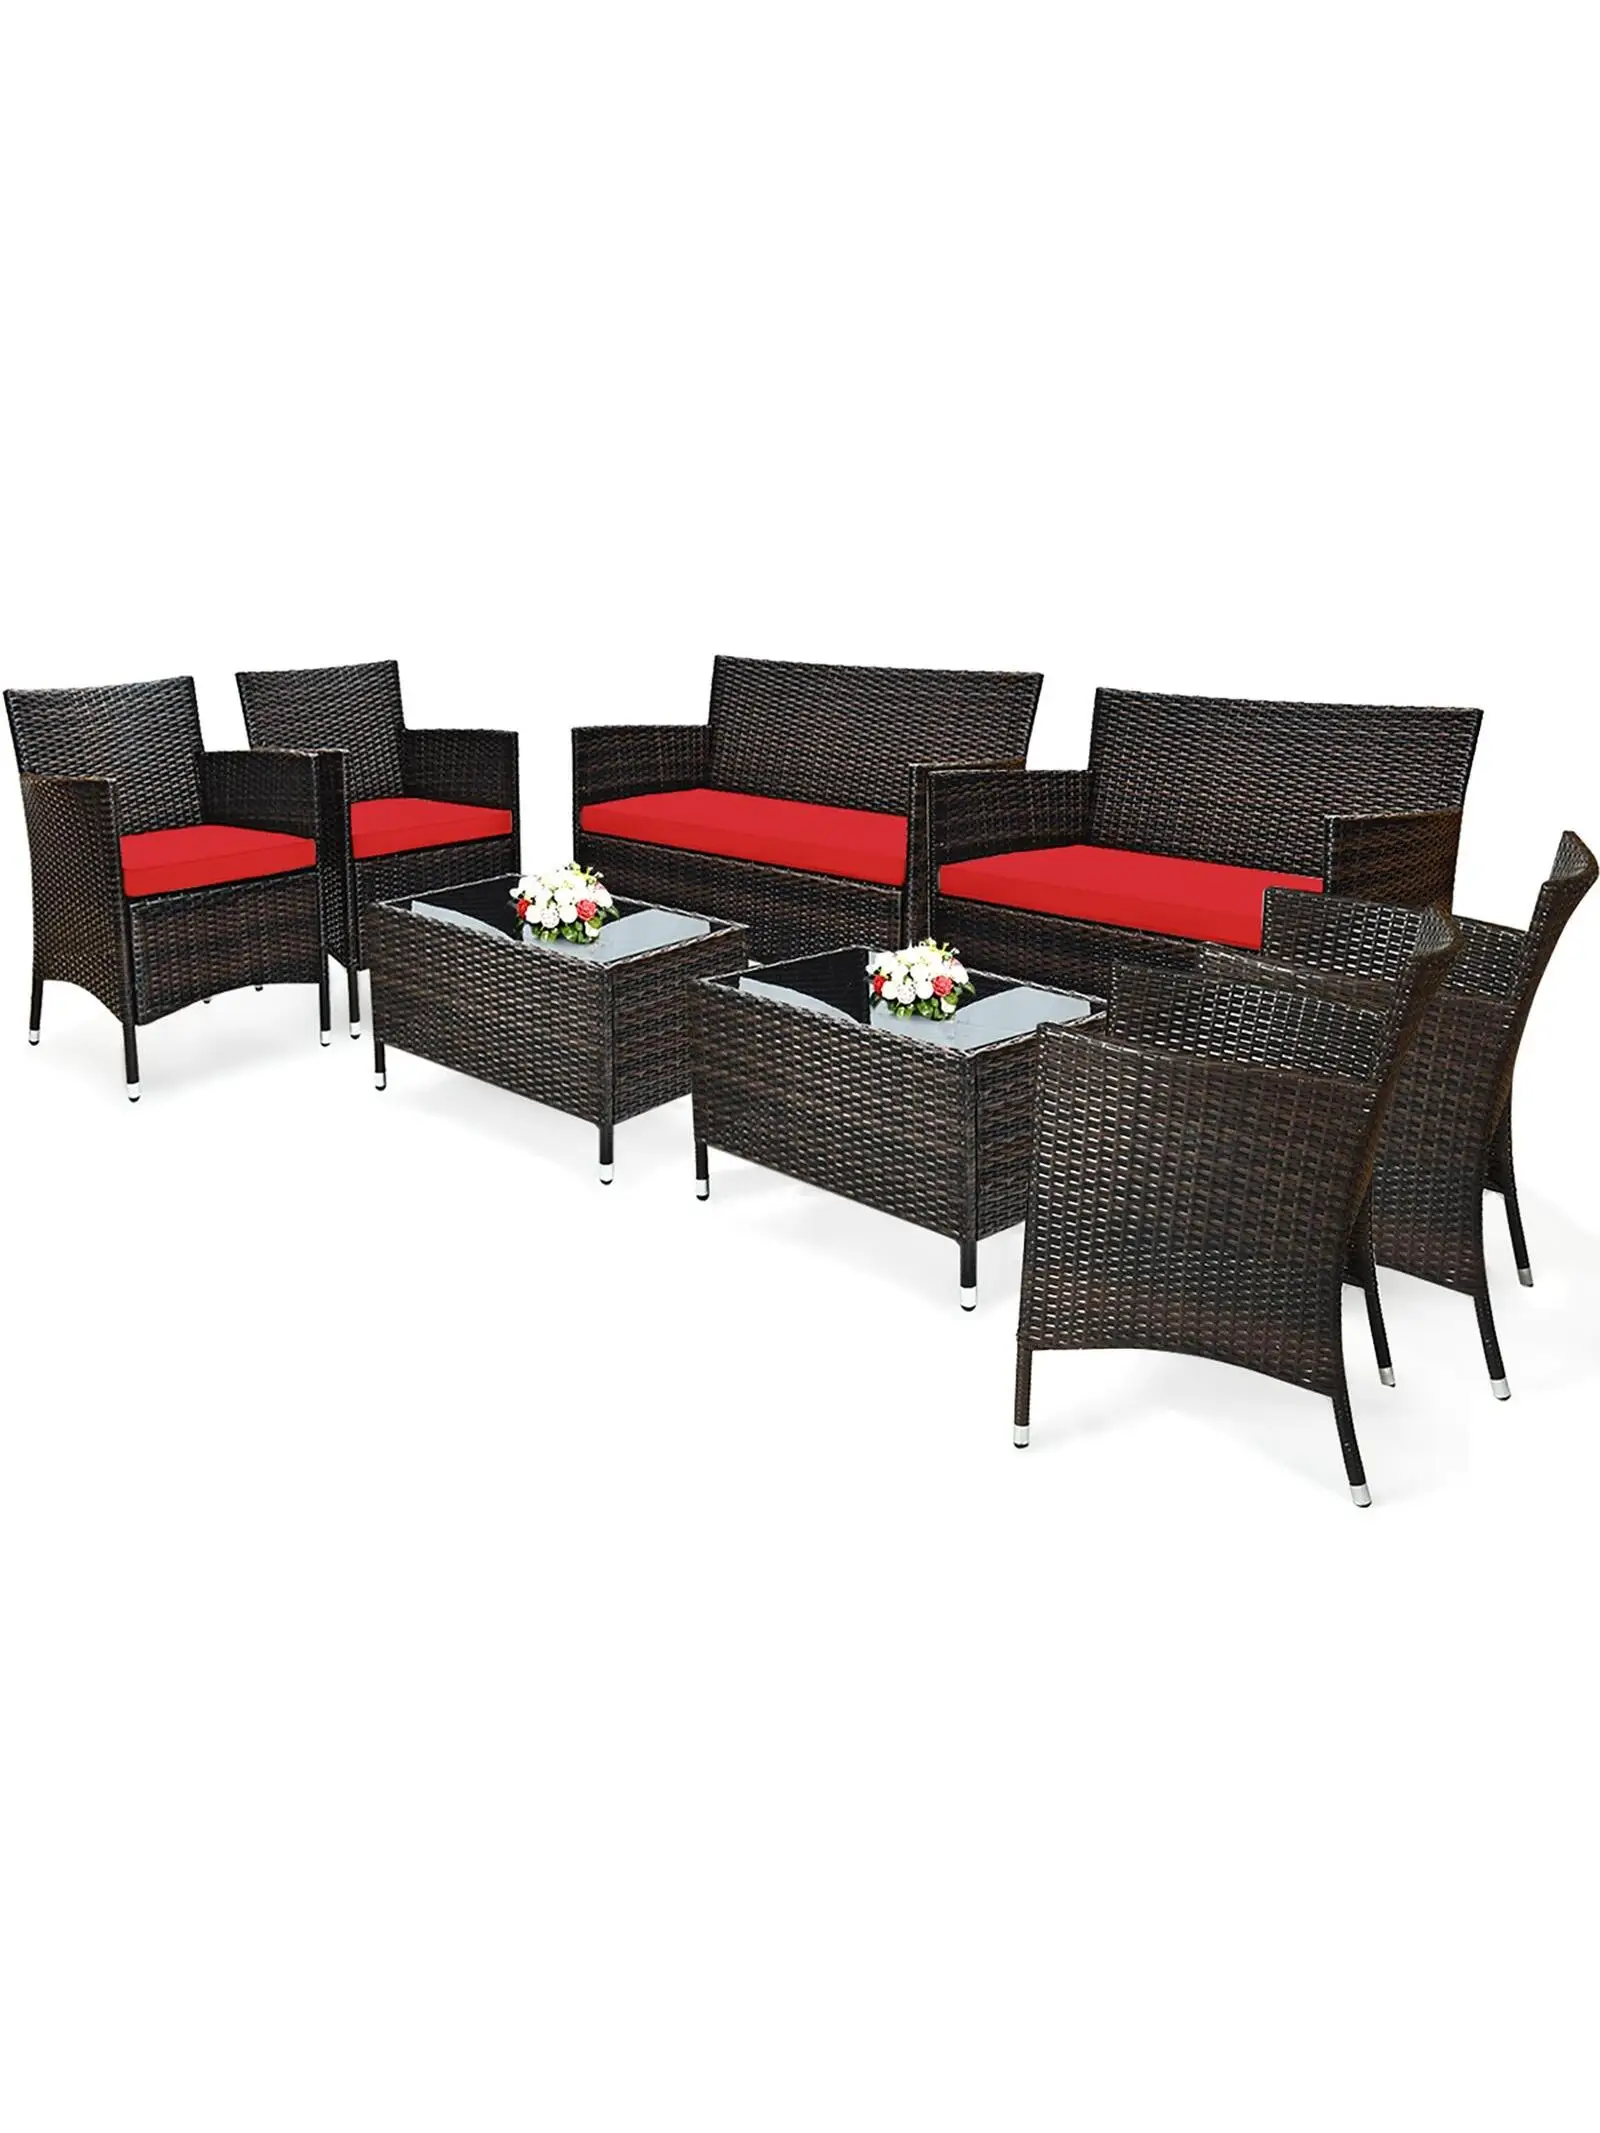 8PCS Patio Sectional Furniture Set Rattan Wicker Coffee Table 6